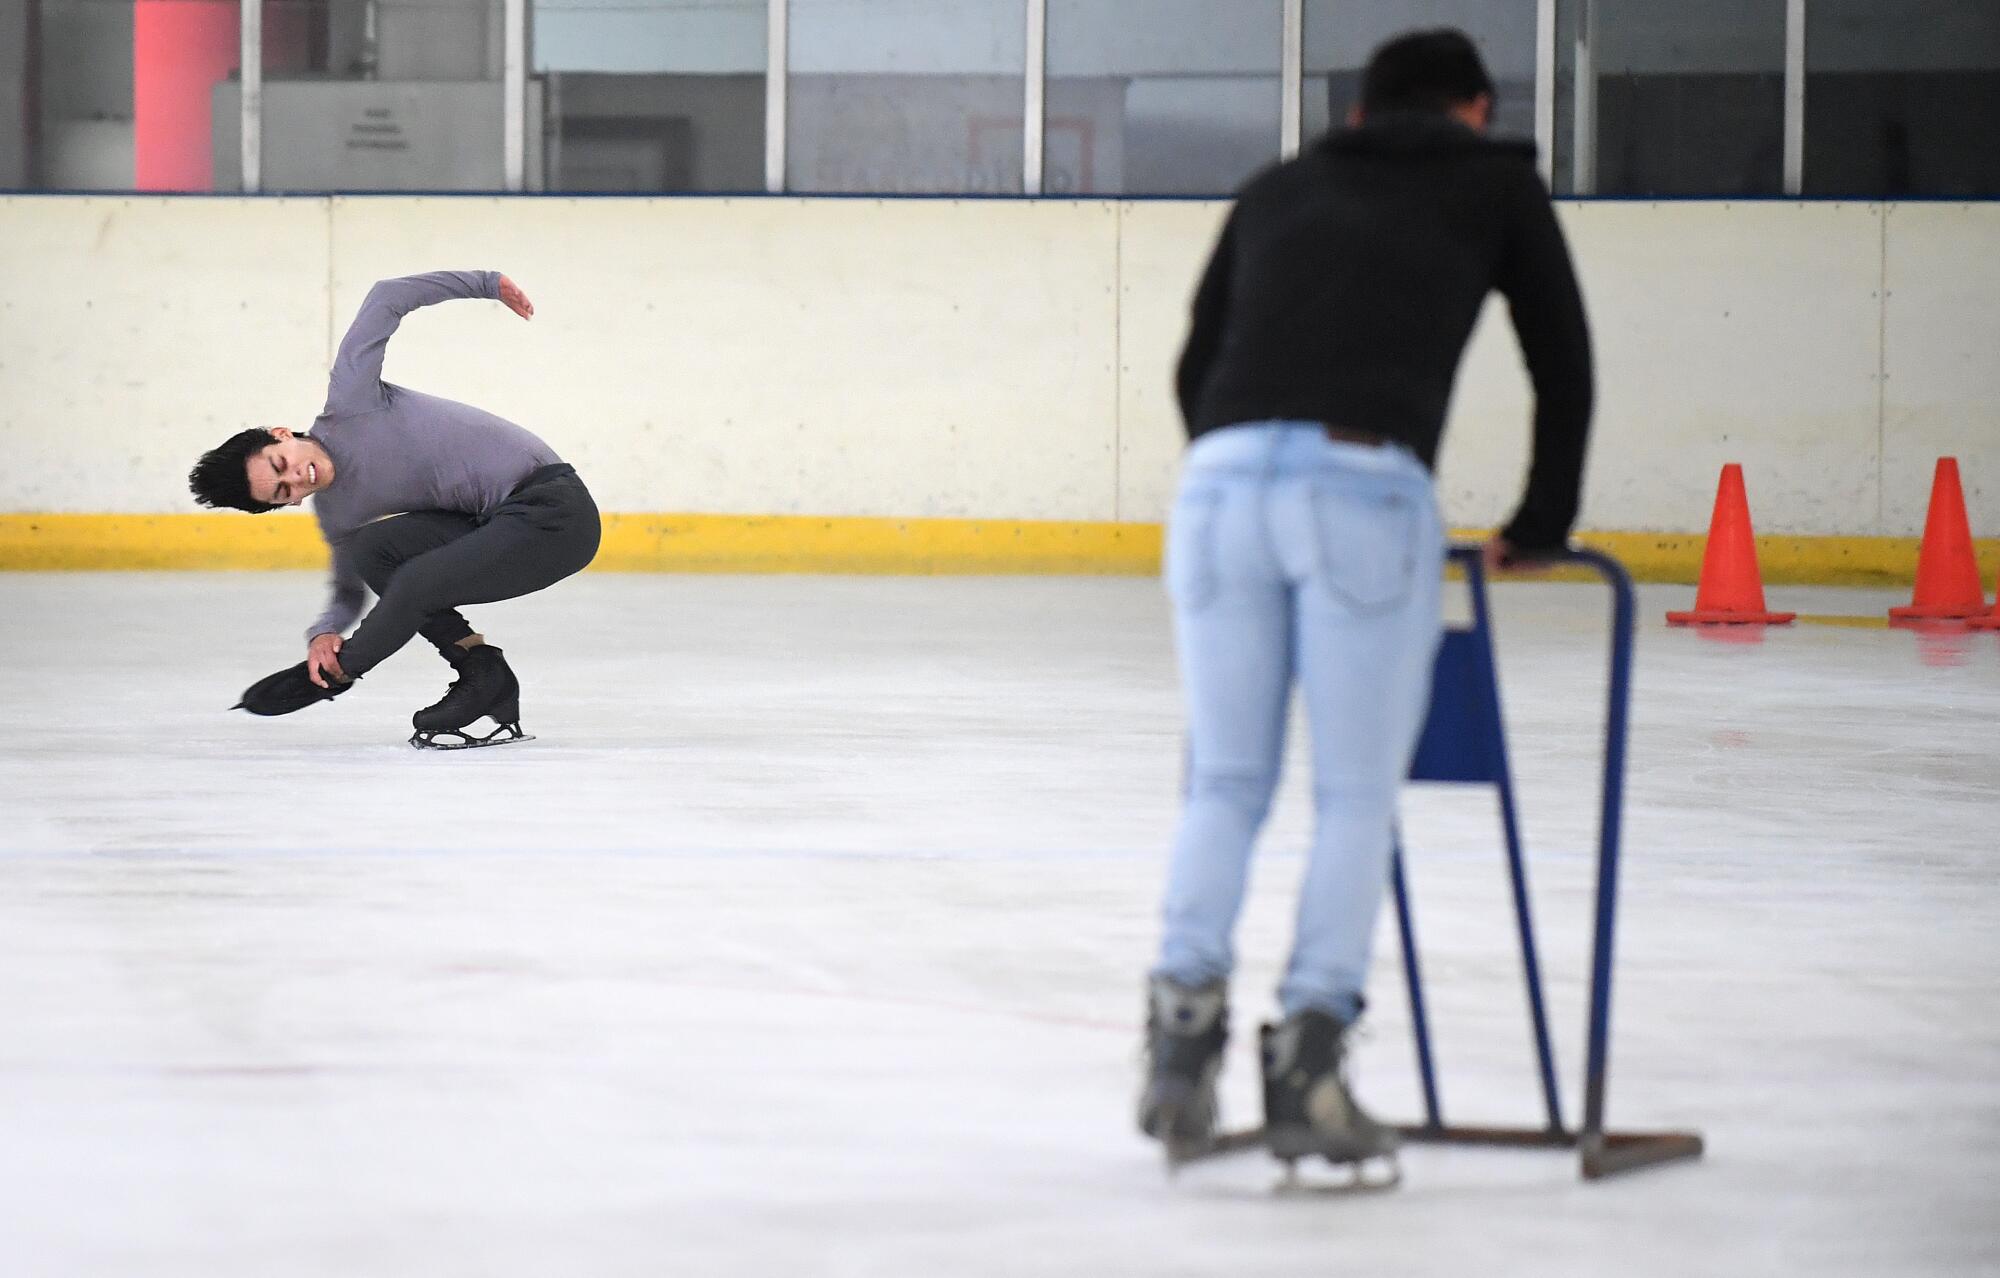 Mexican figure skater Donovan Carrillo shares the ice with beginners during practice 